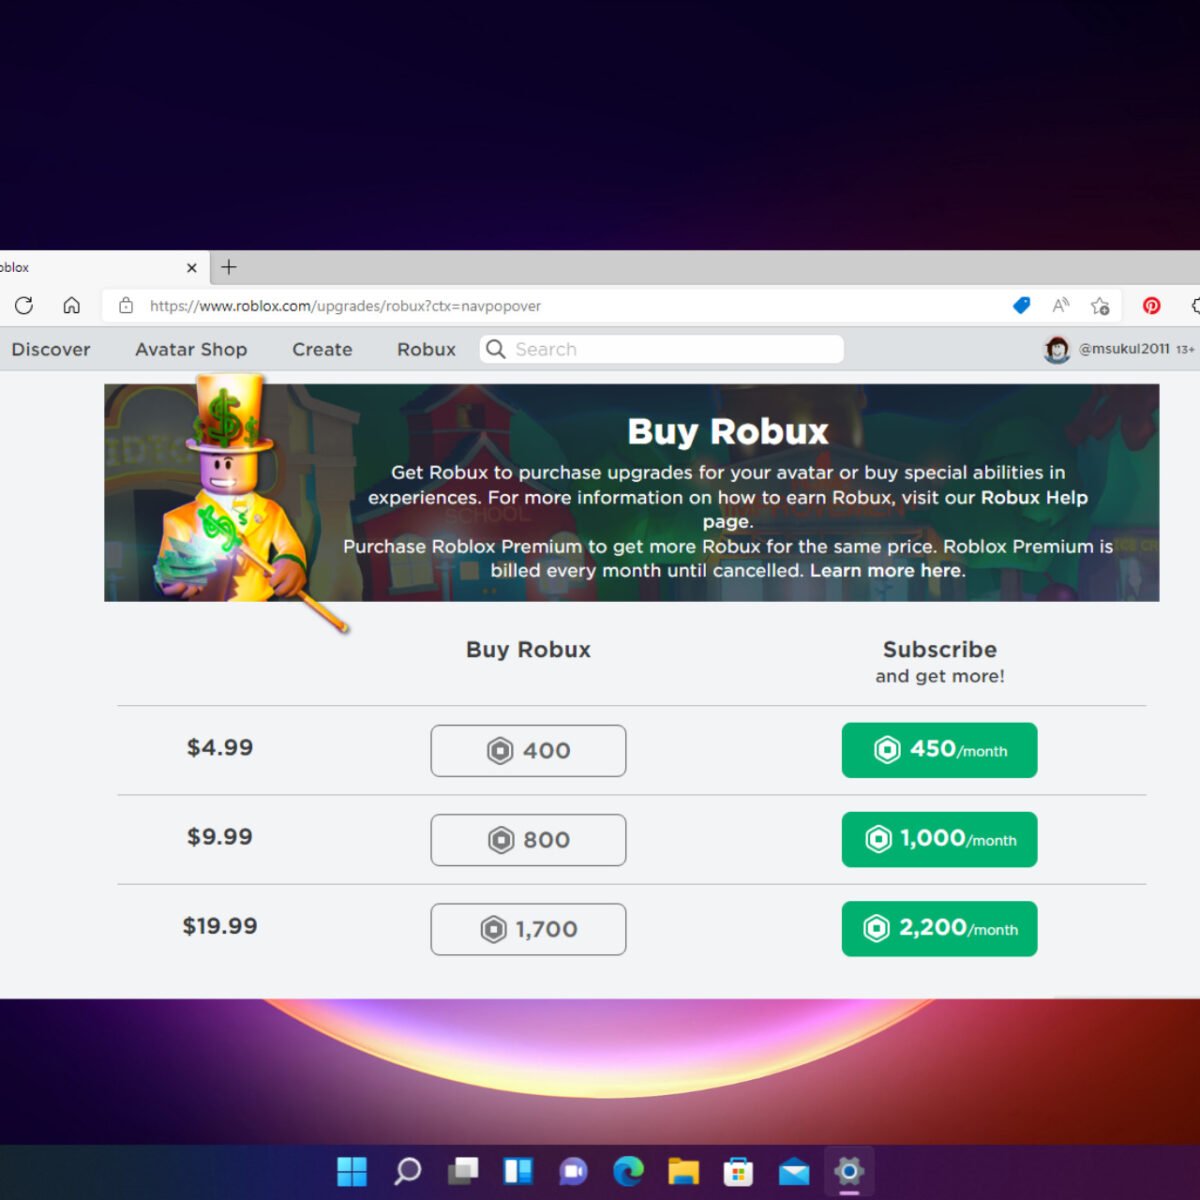 What is Roblox, and how can I get free Robux? - Quora